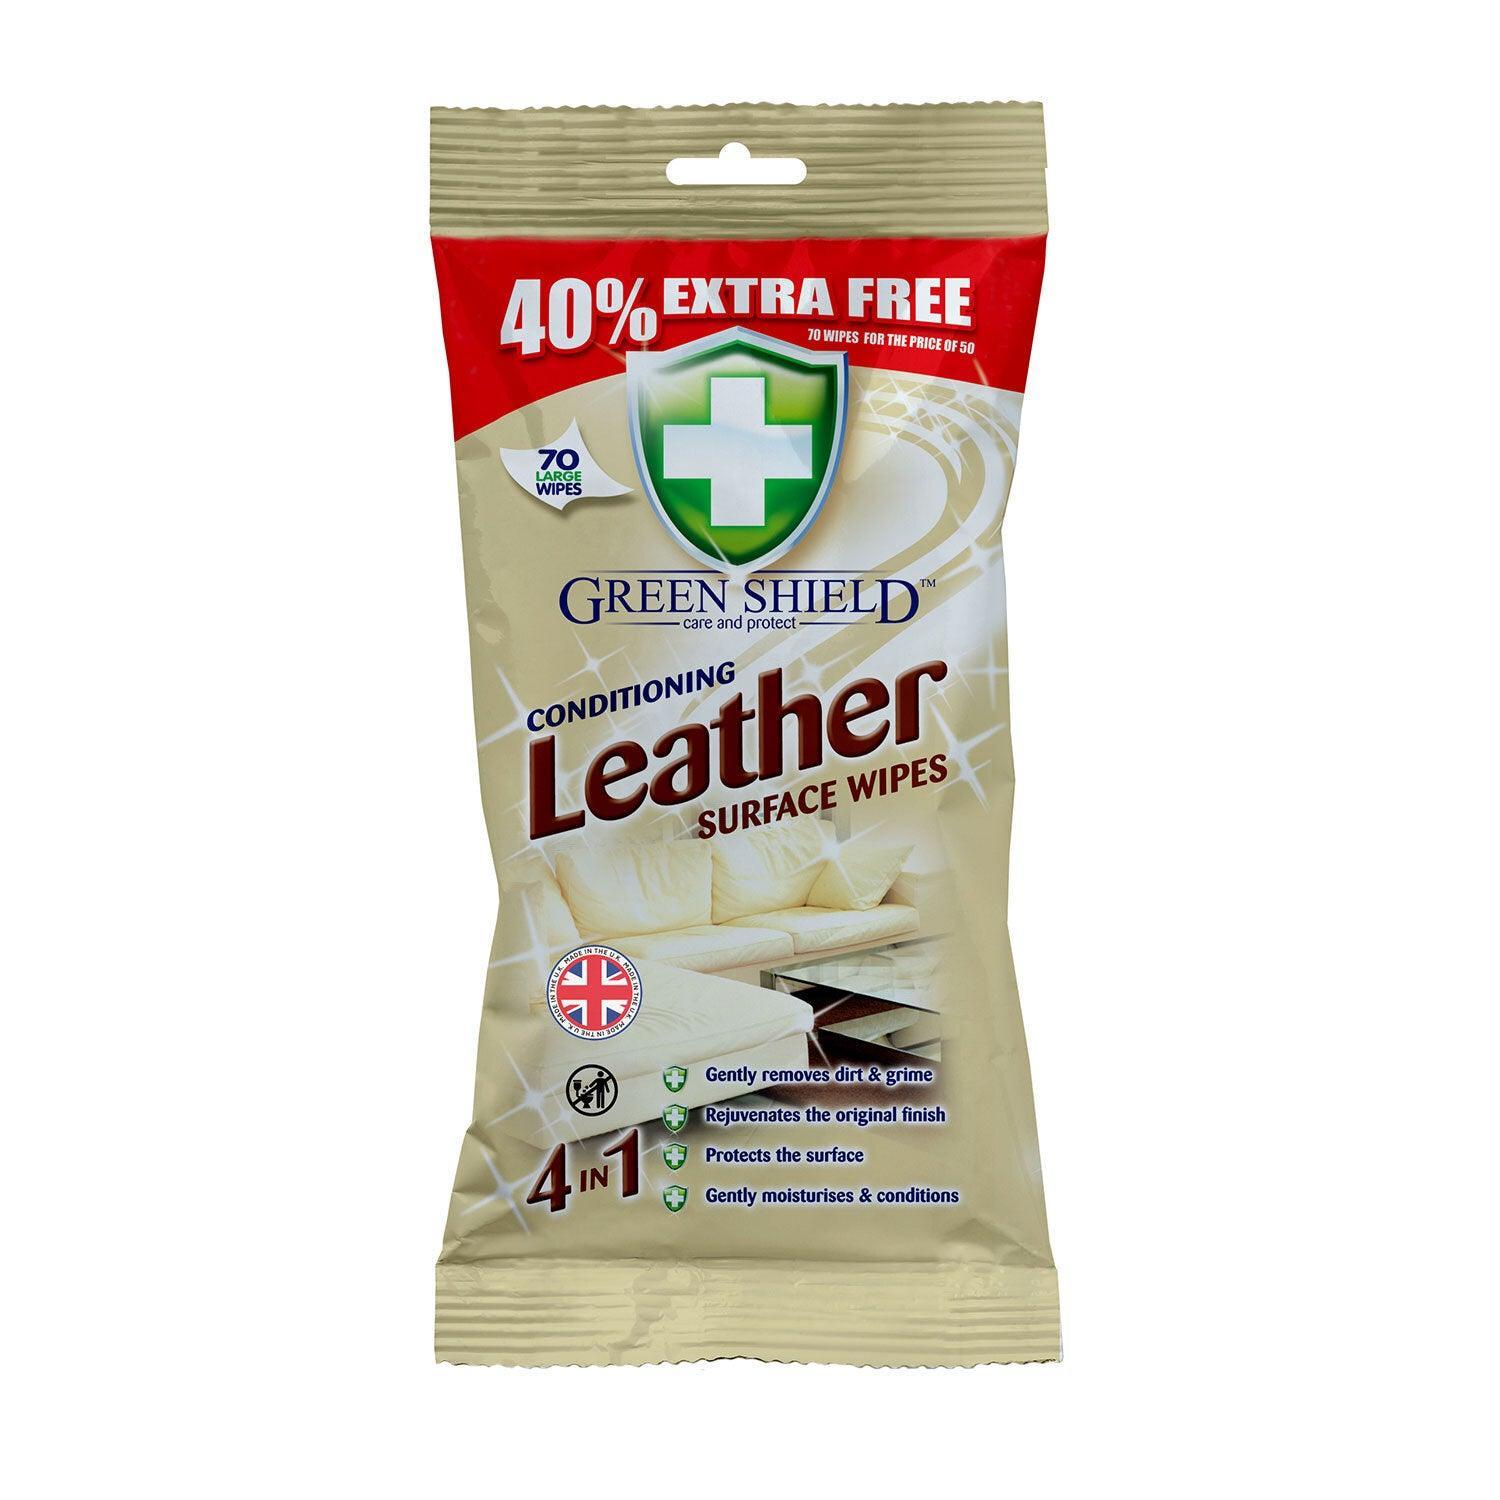 Greenshield Conditioning Leather Wipes | Pack 70 - Choice Stores